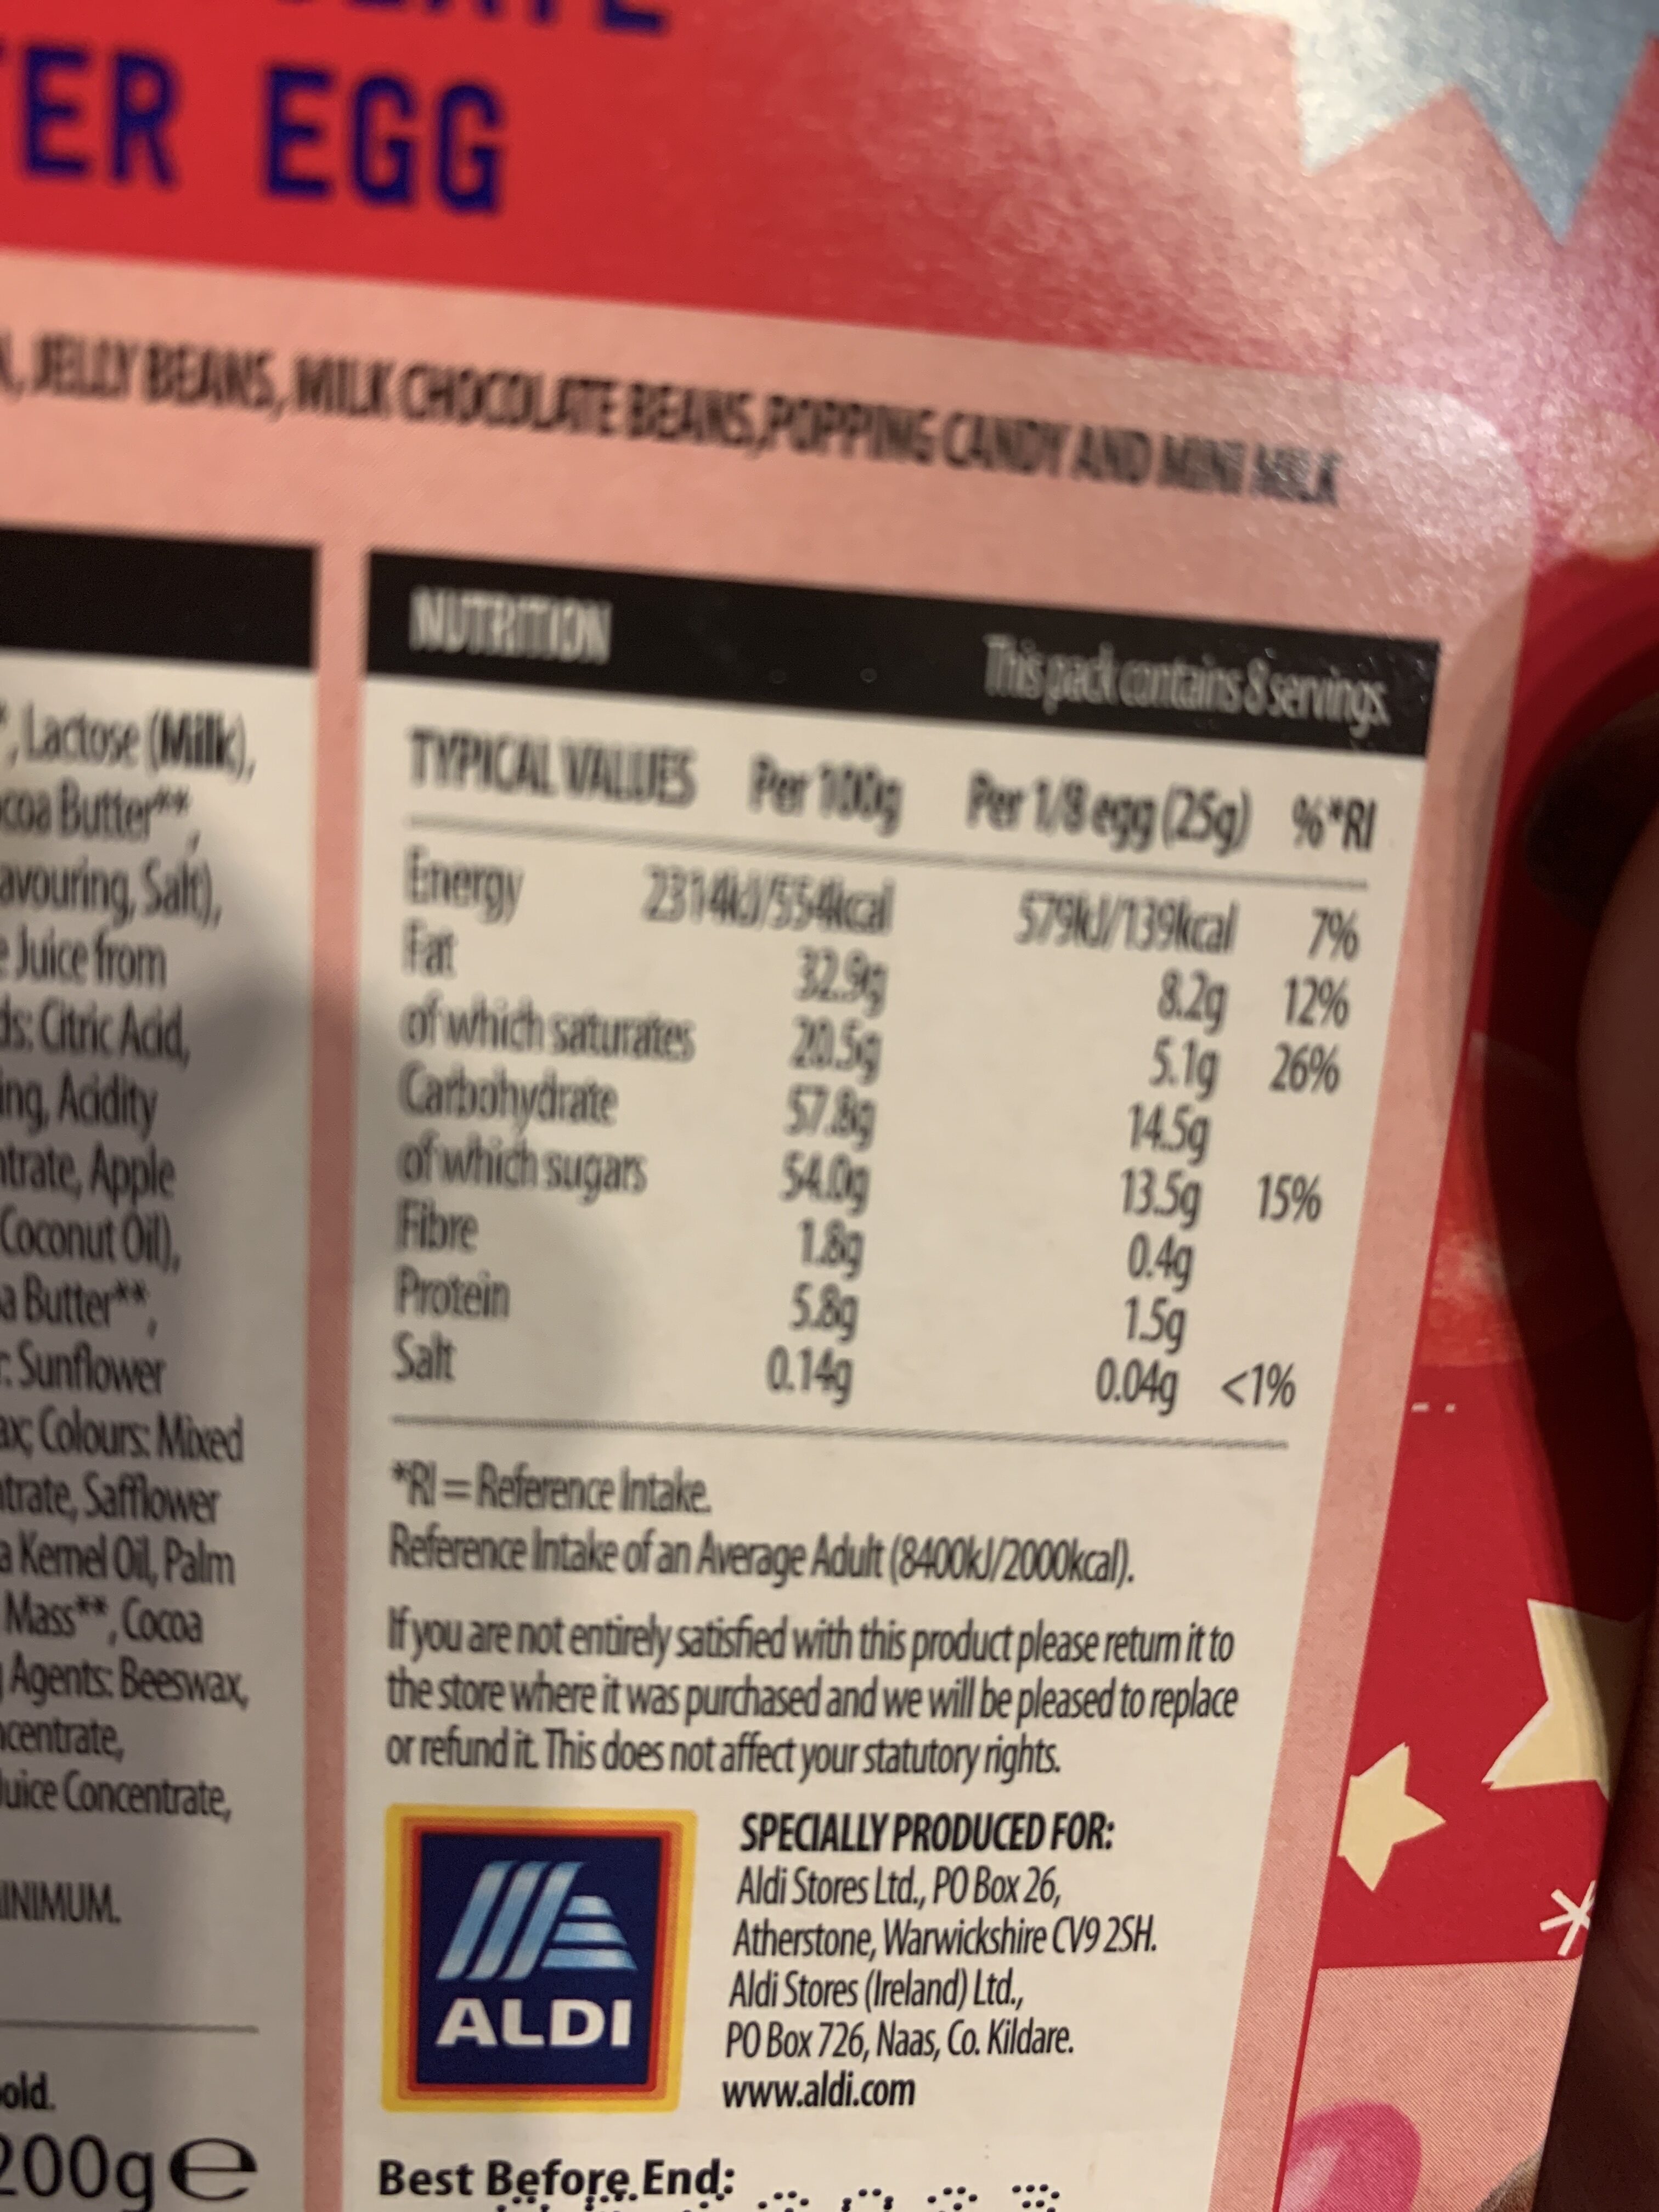 Popping Candy Easter Egg - Nutrition facts